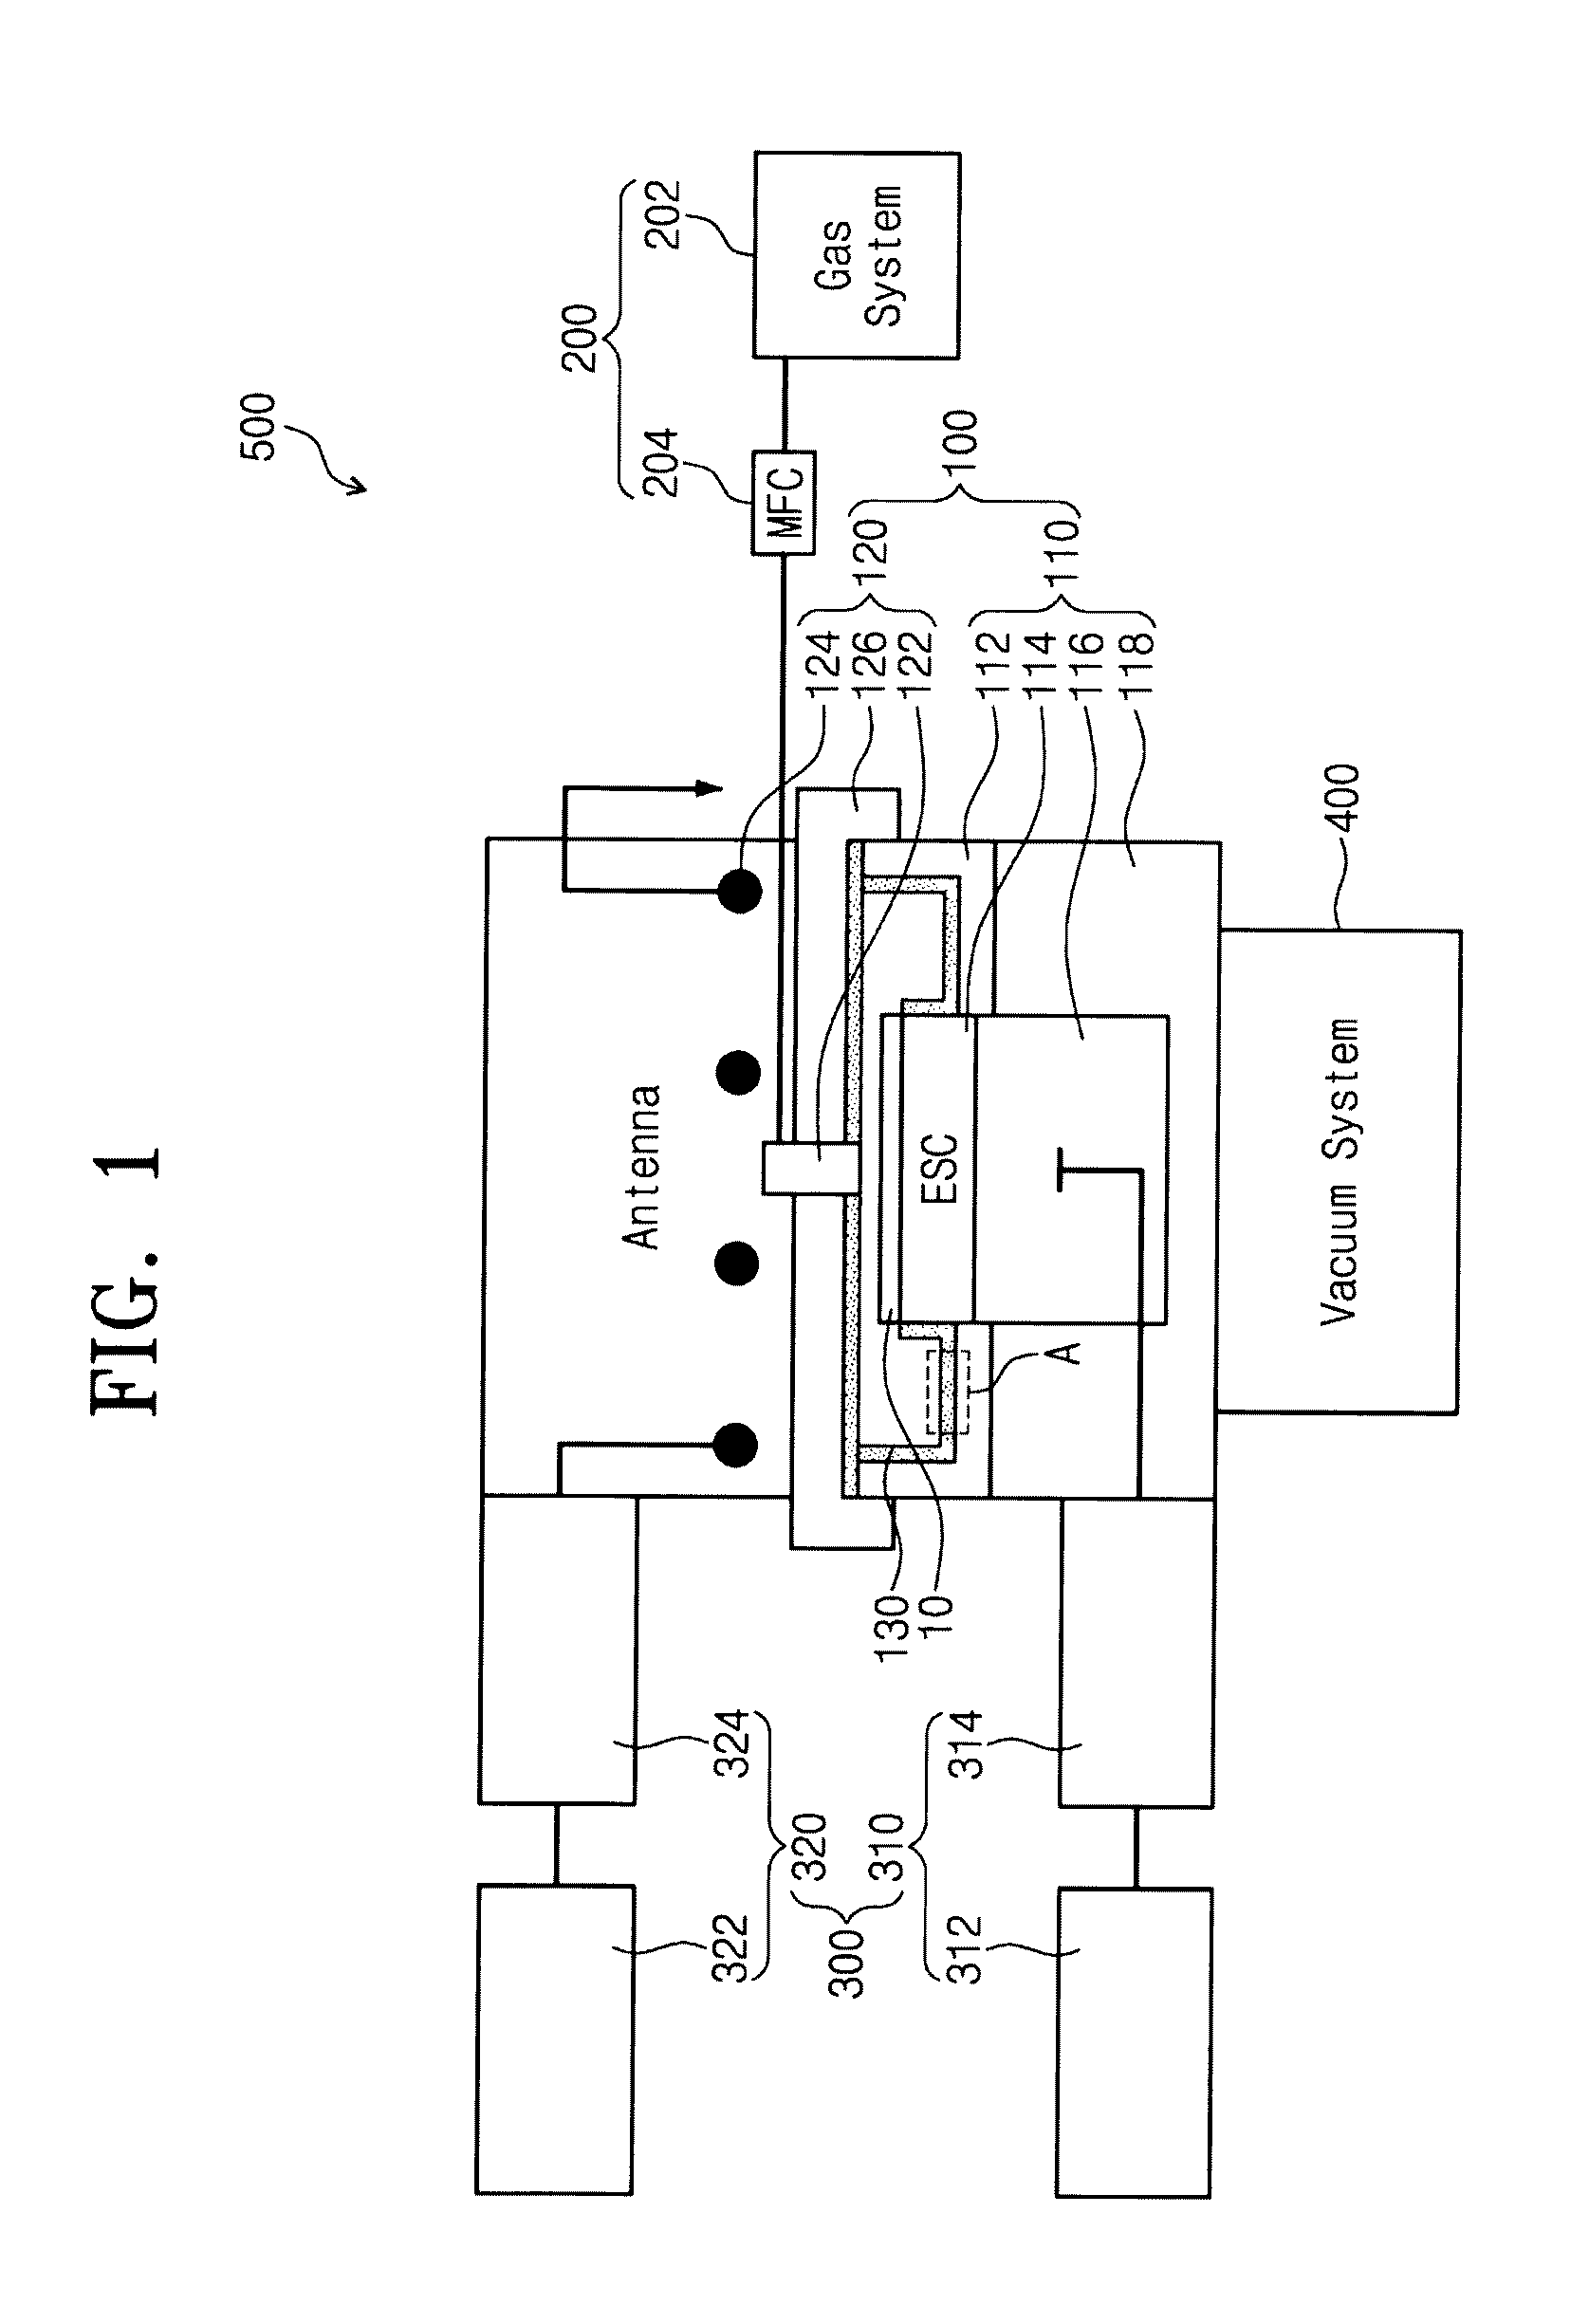 Substrate Processing System and Ceramic Coating Method Therefor